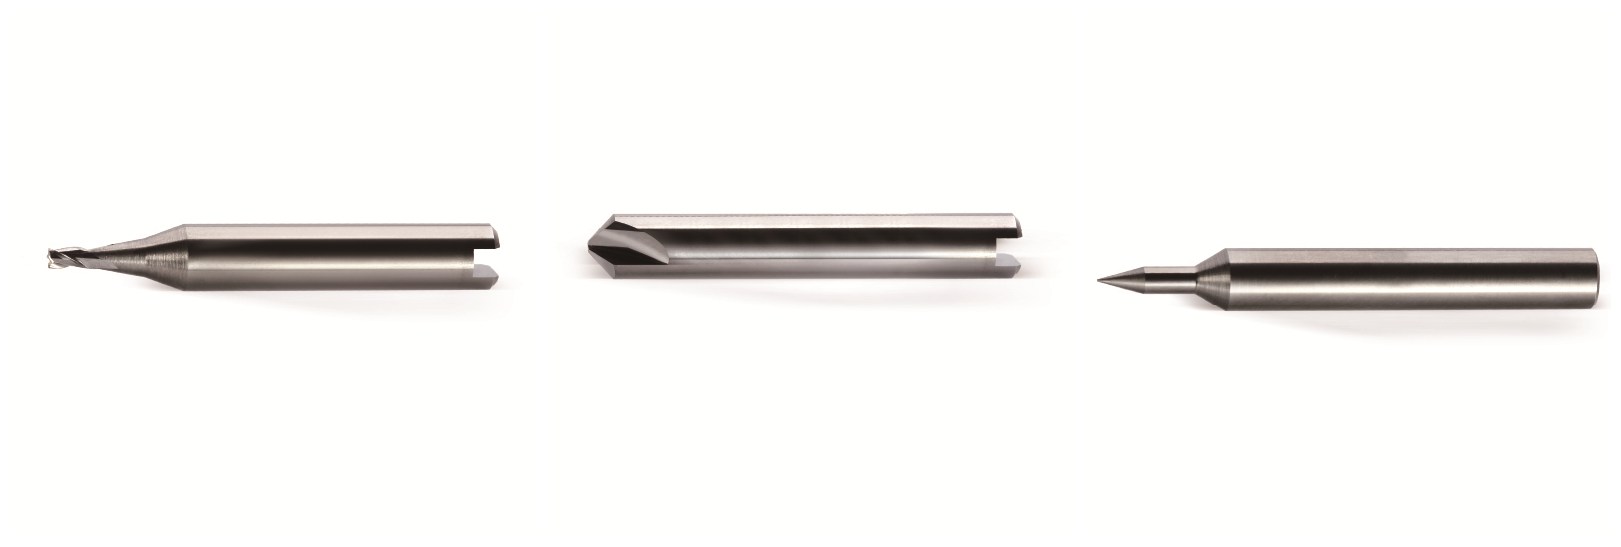 solid carbide end mill cutter and tracer point compatible with viper